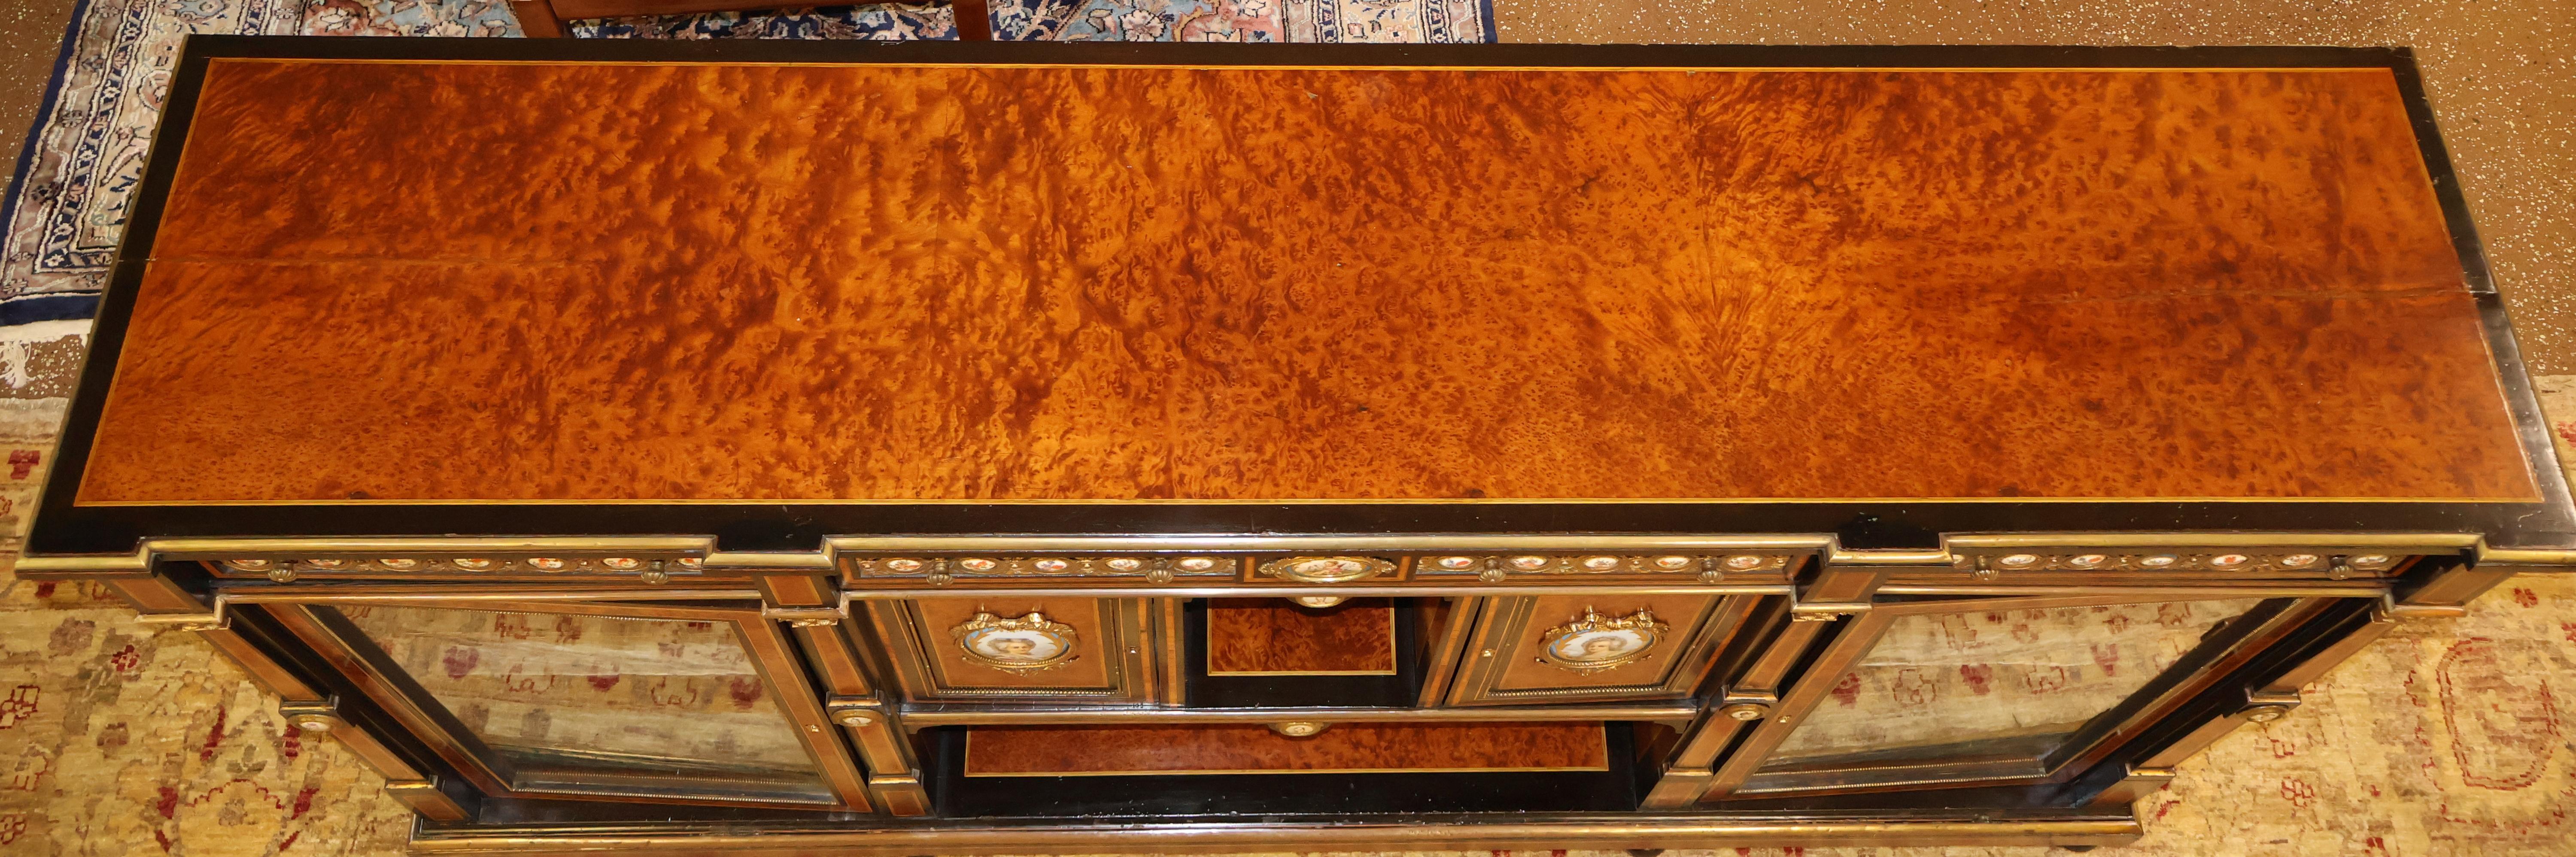 19th Century Napoleon III Style English Inlaid Porcelain Sideboard S. Hall & Son For Sale 9